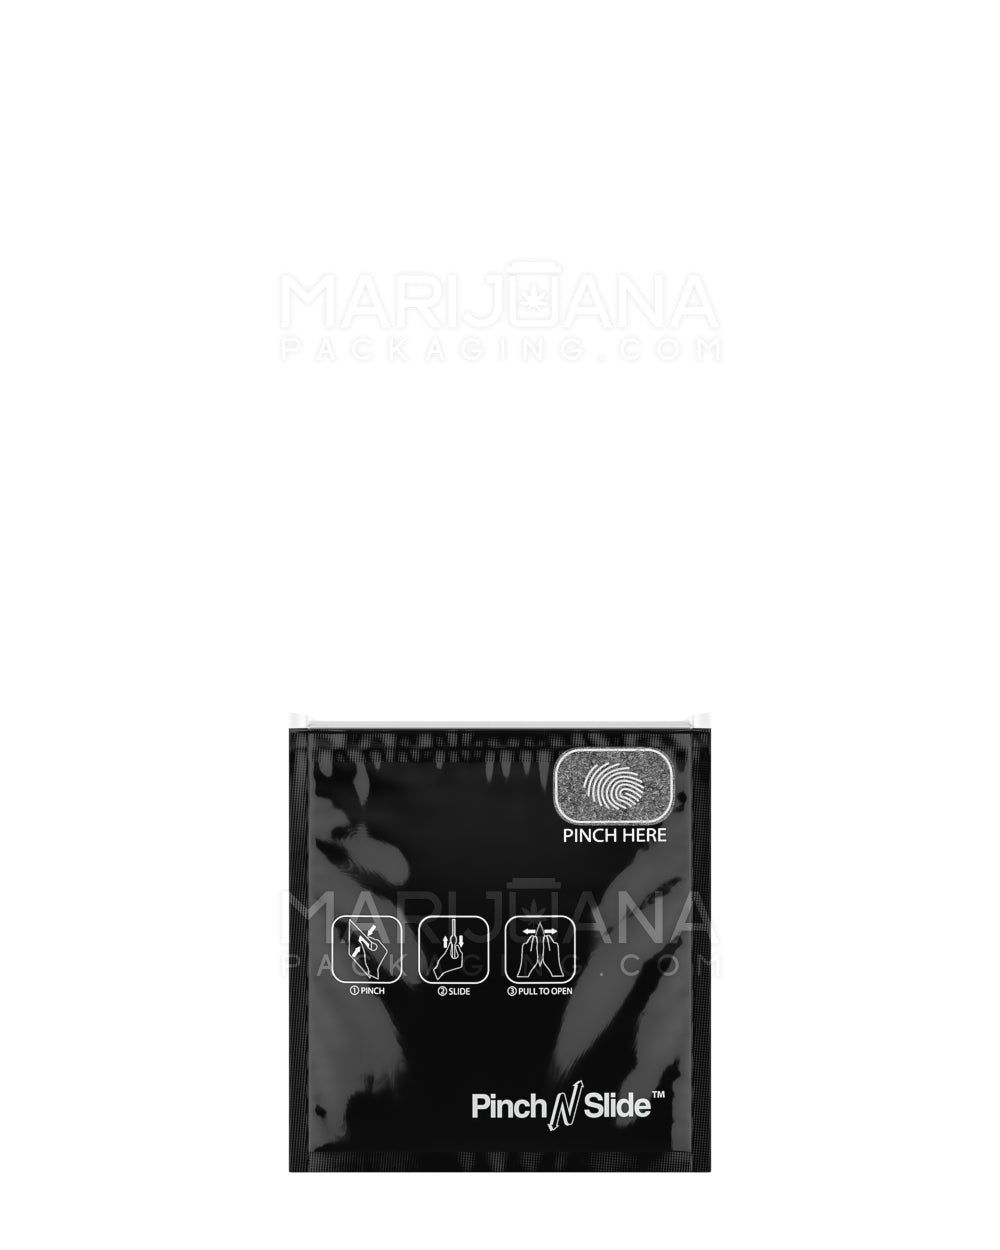 Child Resistant | Pinch N Slide ASTM Glossy Black Mylar Bags | 3.4in x 3.7in - 1g - 250 Count - 1